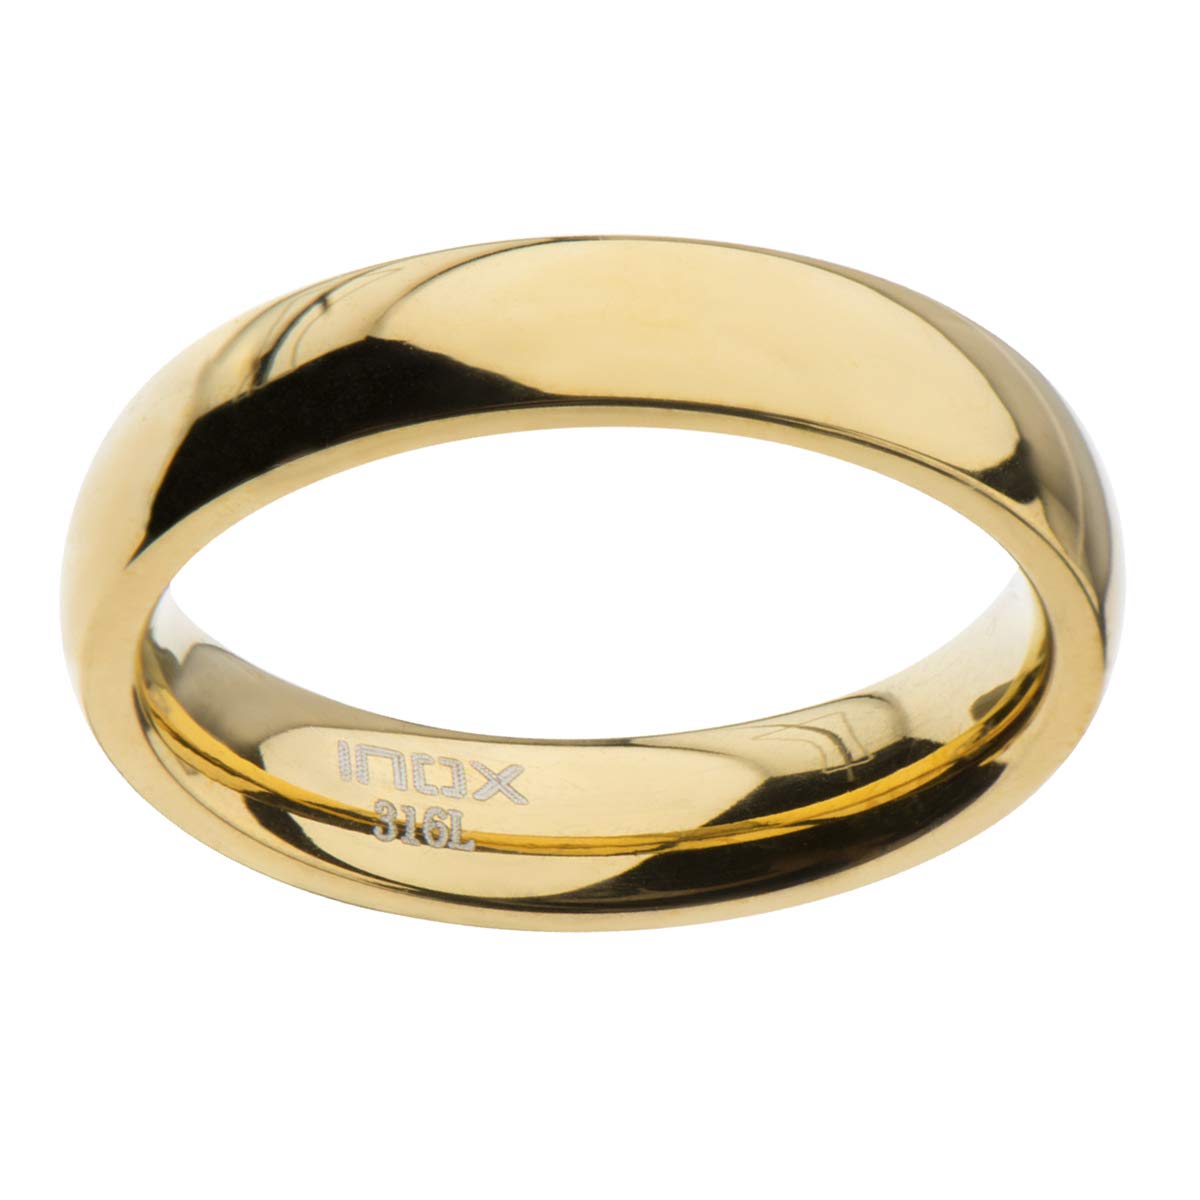 Gold High Polished Ring | Inox | Luby 